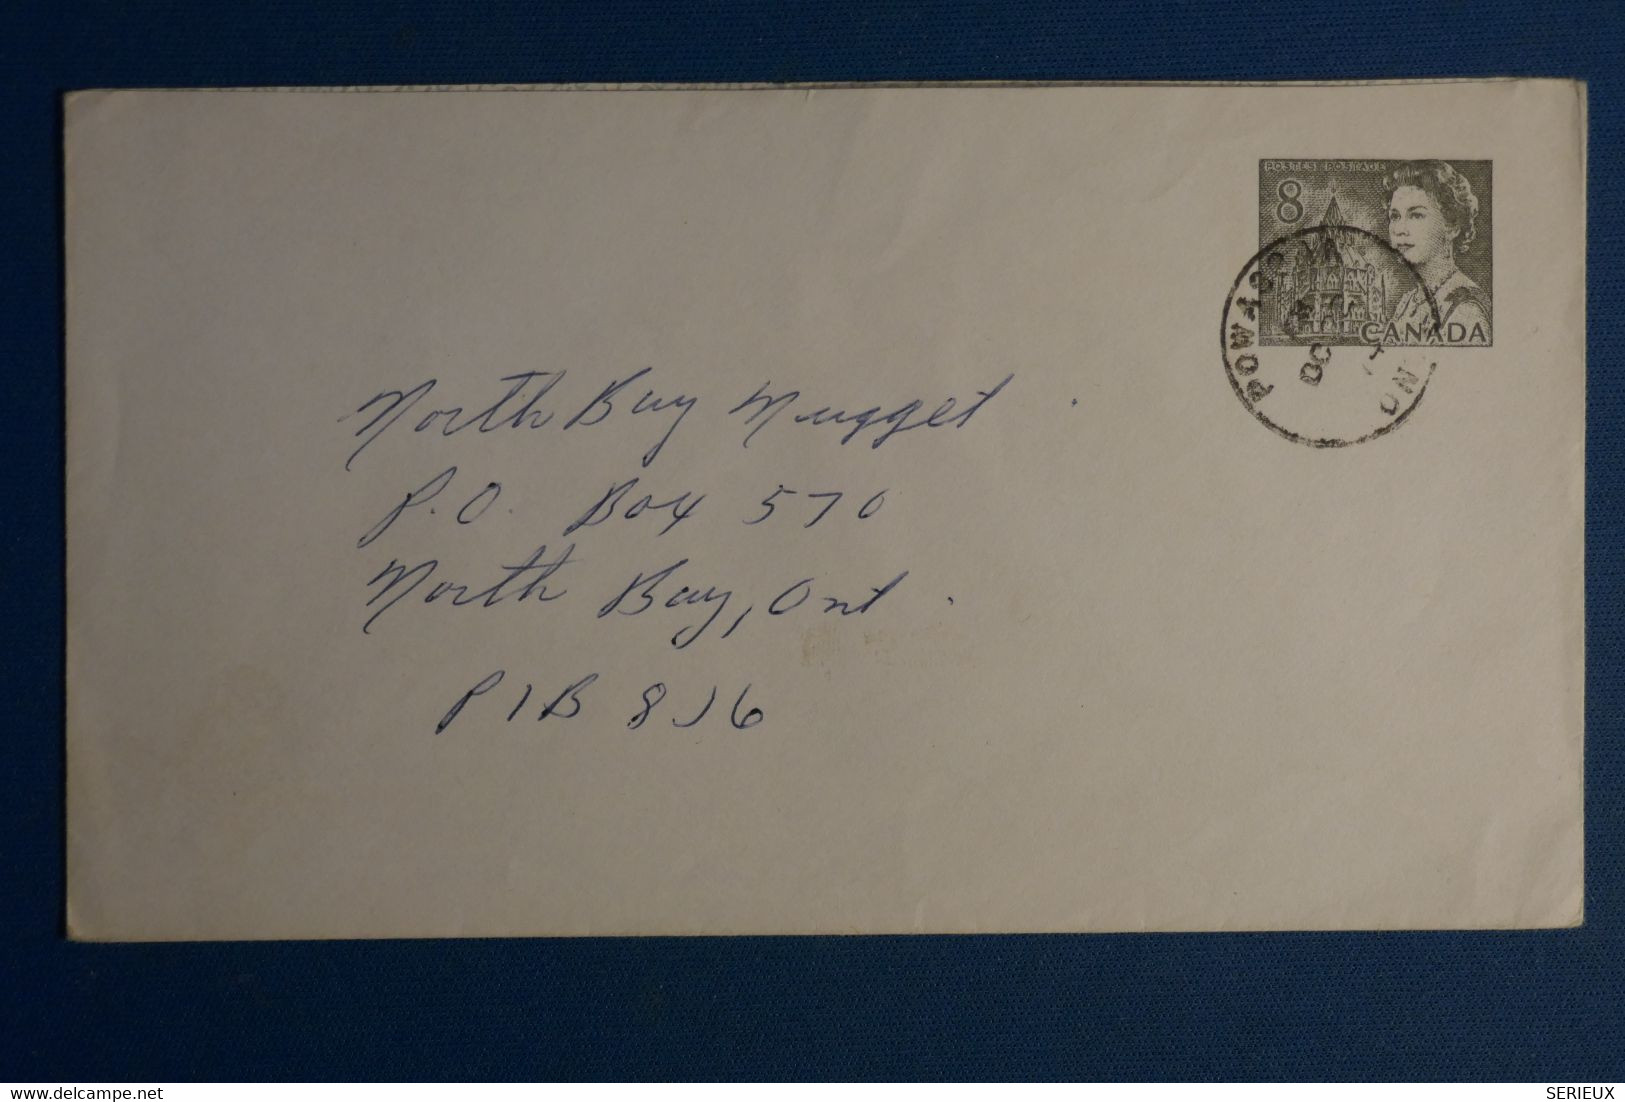 A0 10 CANADA   BELLE LETTRE   1967++  POUR NORTH BAY +AFFRANCH. INTERESSANT - Covers & Documents